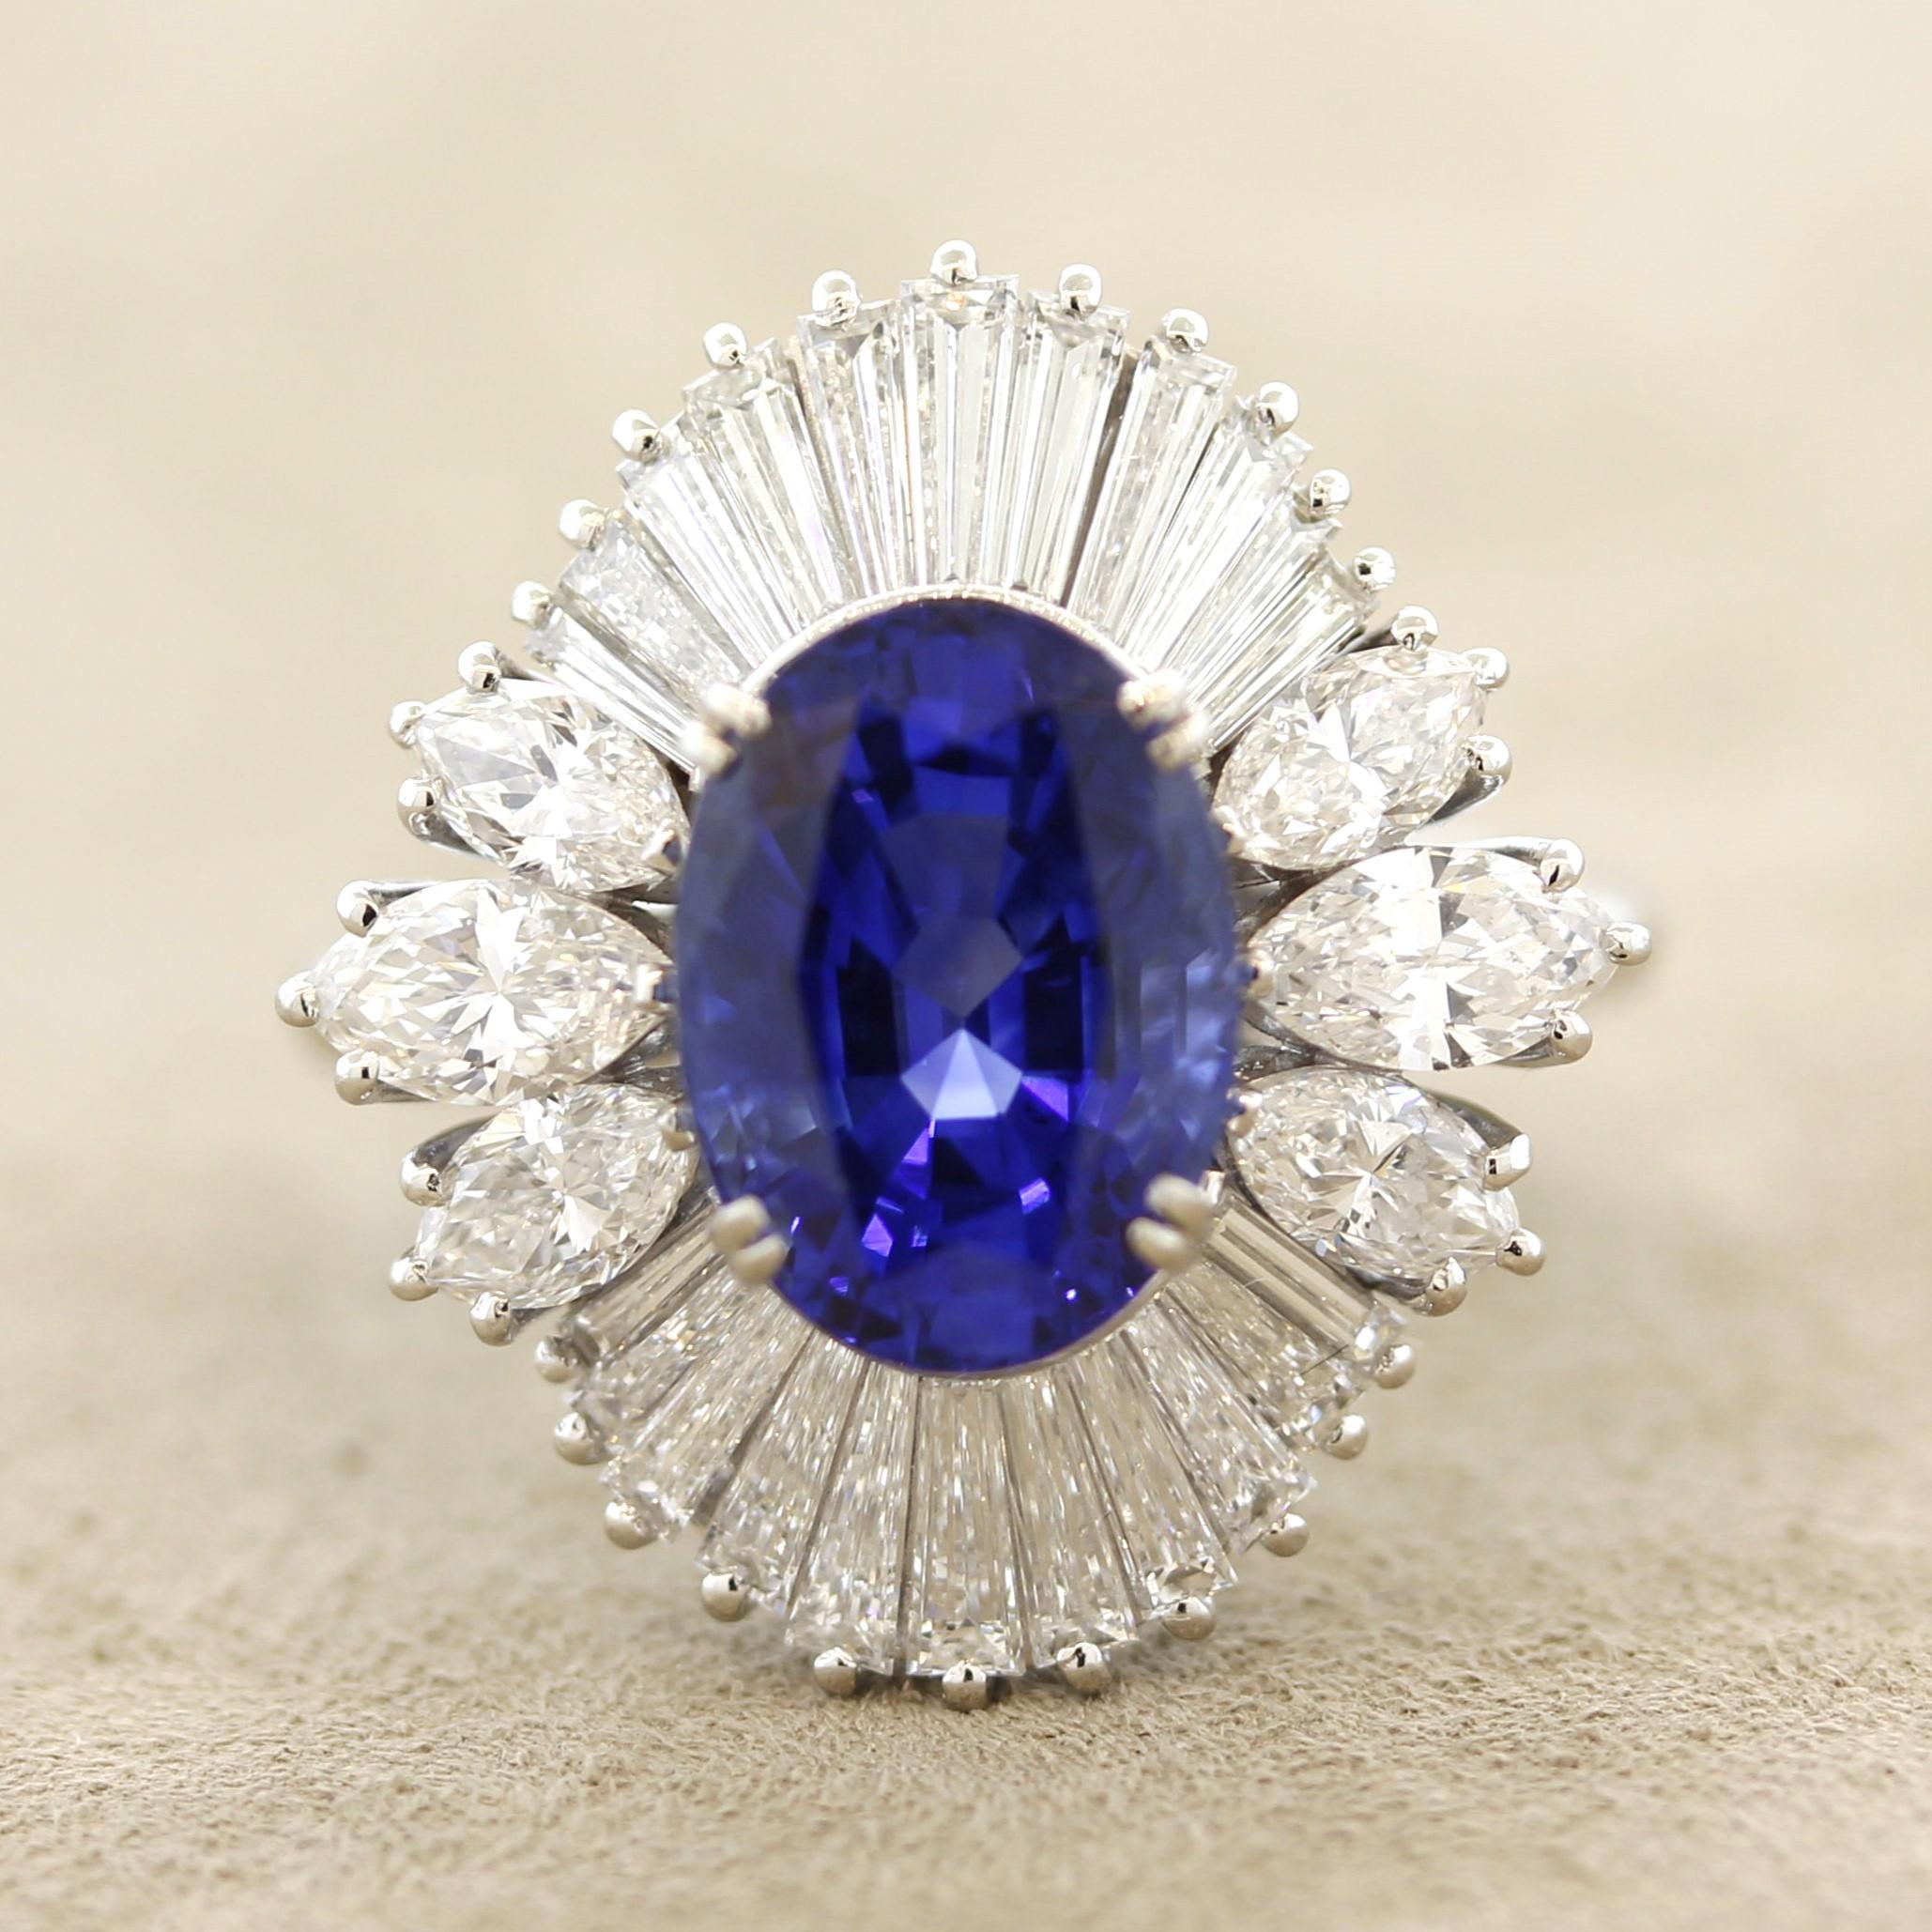 A gem blue sapphire, certified by the GIA, takes center stage of this lovely platinum ring. The sapphire weighs just shy of 5 carats, 4.97 carats, and has a royal vivid blue color which is still bright and clear, a true gem. It is complemented by